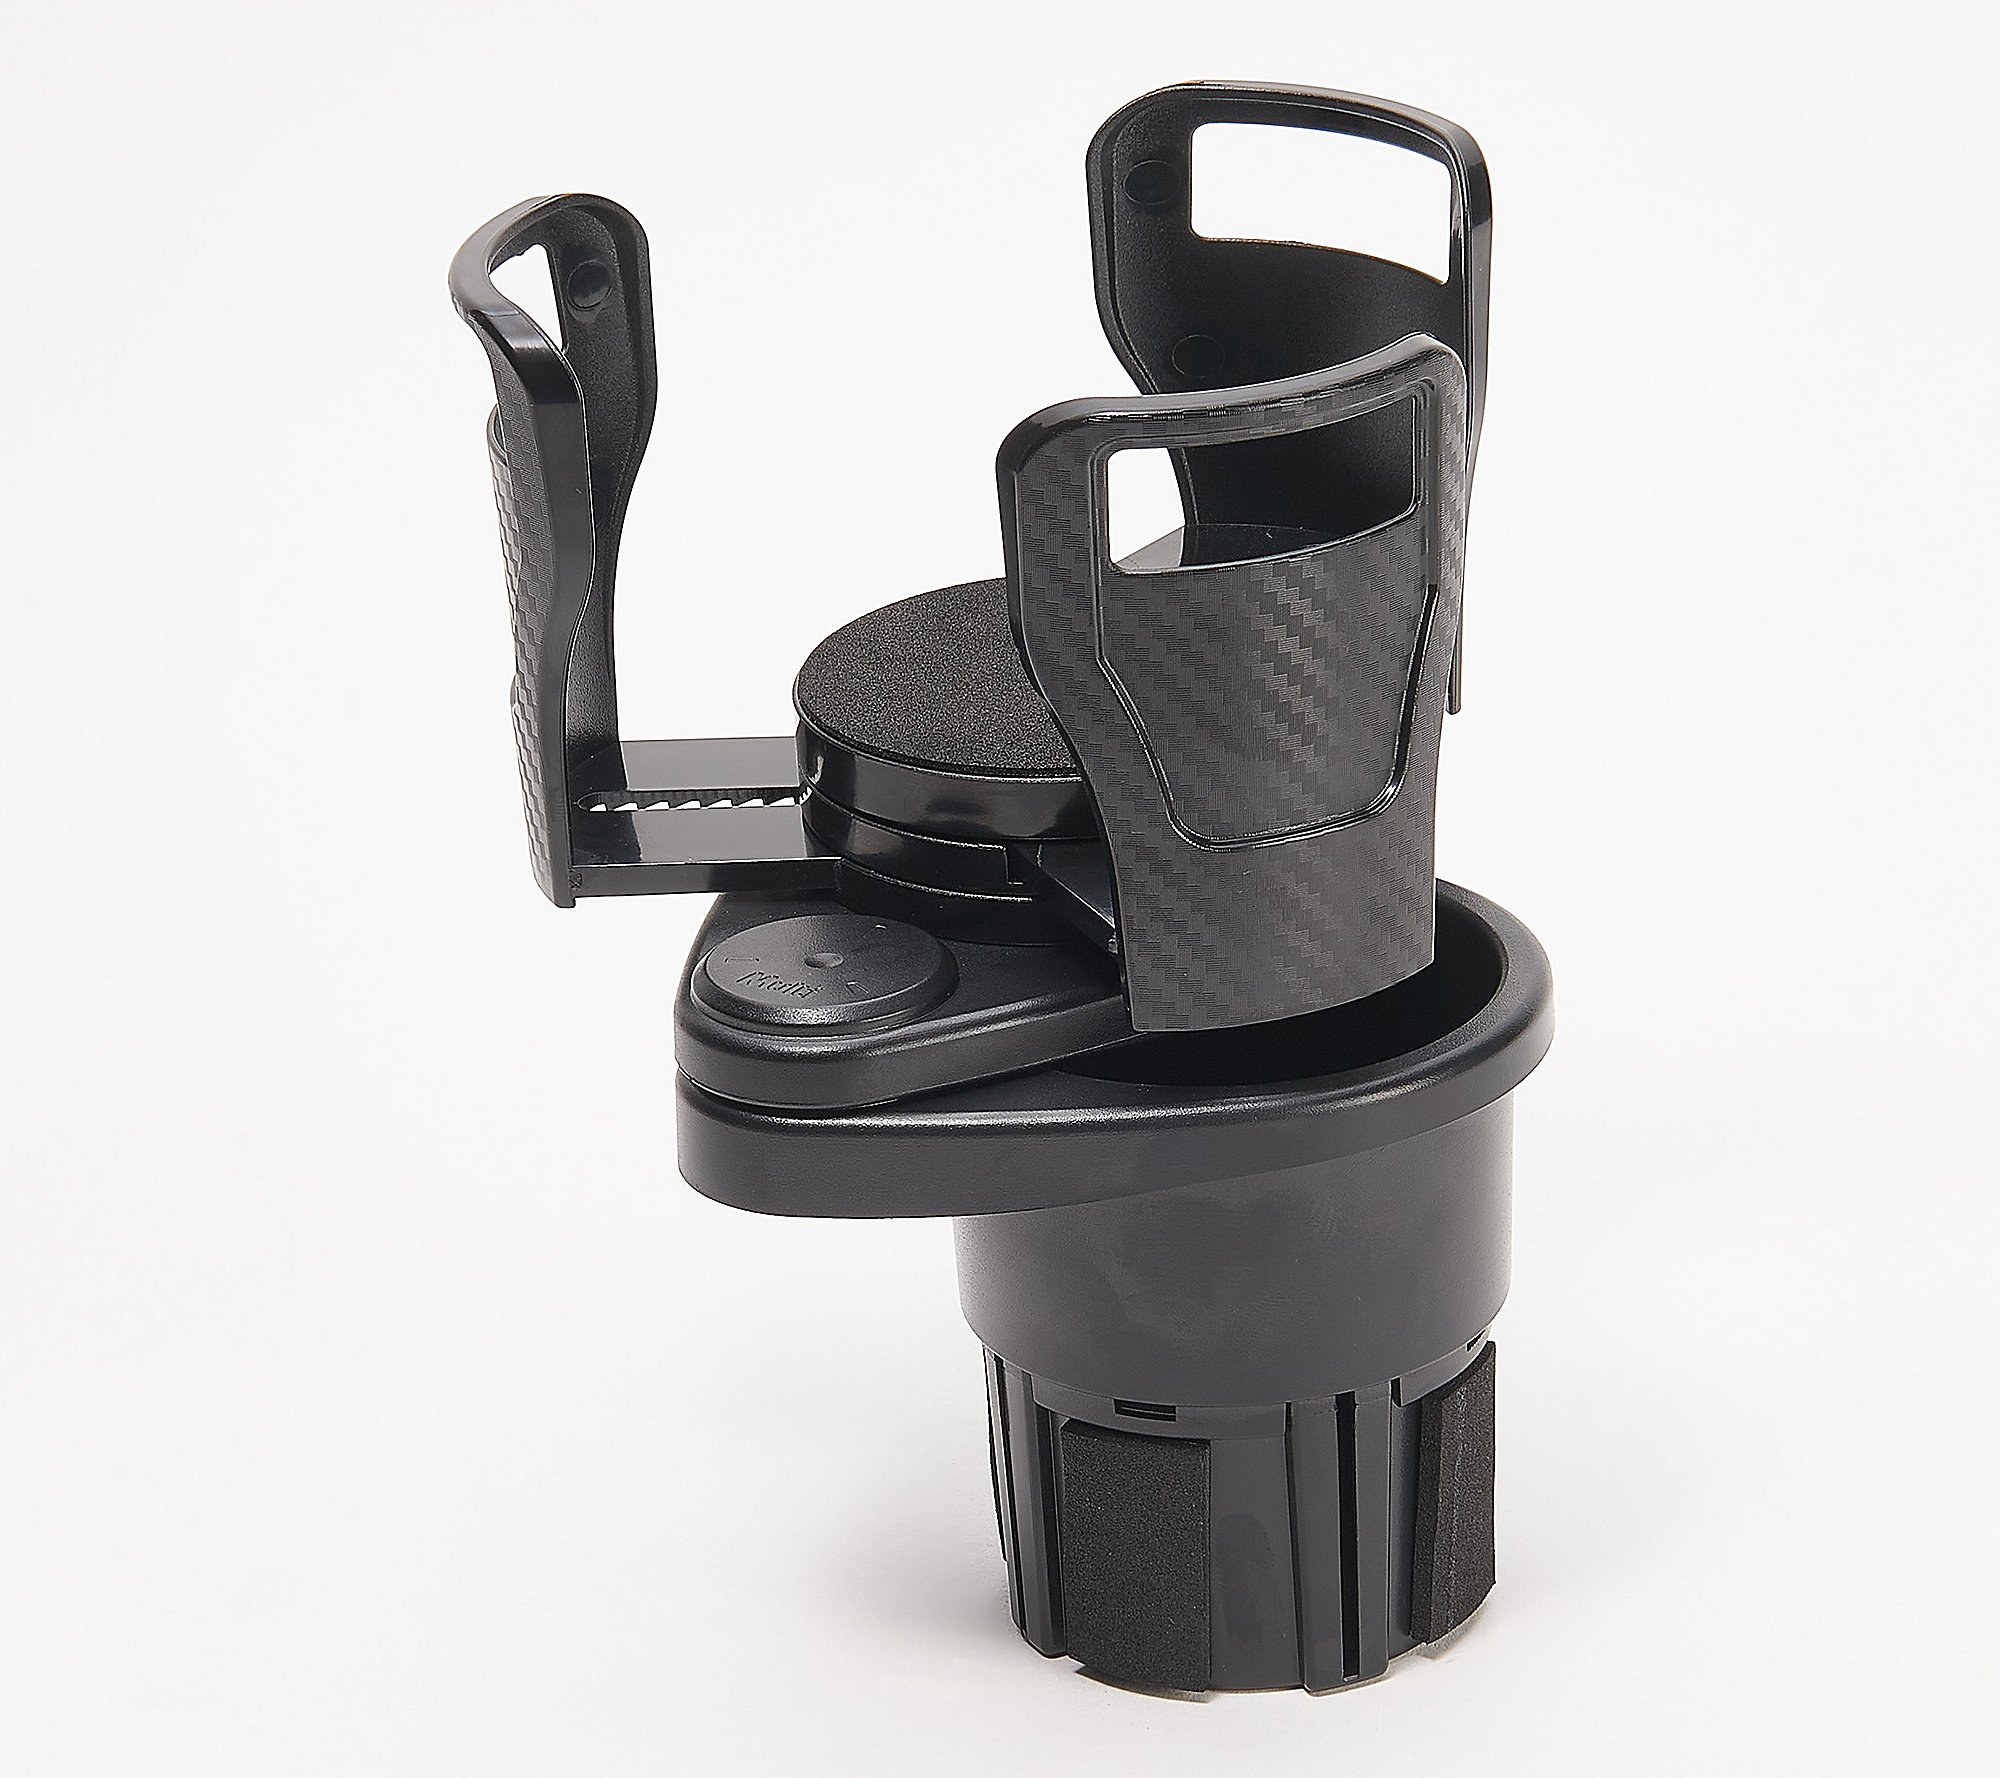 Limitless CupStation Expandable Dual Vehicle Cup Holder 